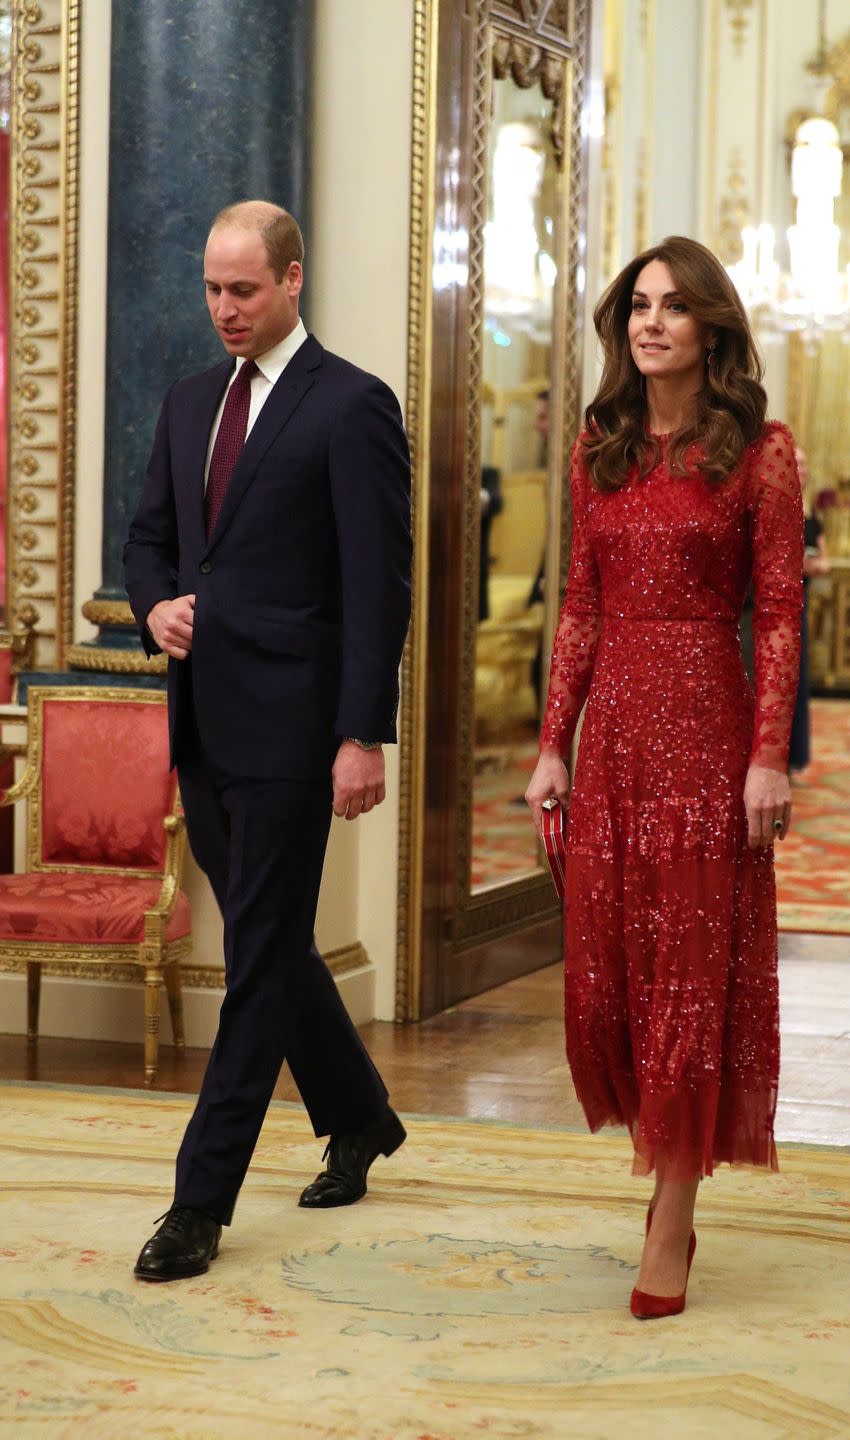 britain's prince william, duke of cambridge l and britain's catherine, duchess of cambridge r host a reception for heads of state and government at buckingham palace in london on january 20, 2020, following the uk africa investment summit photo by yui mok  pool  afp photo by yui mokpoolafp via getty images